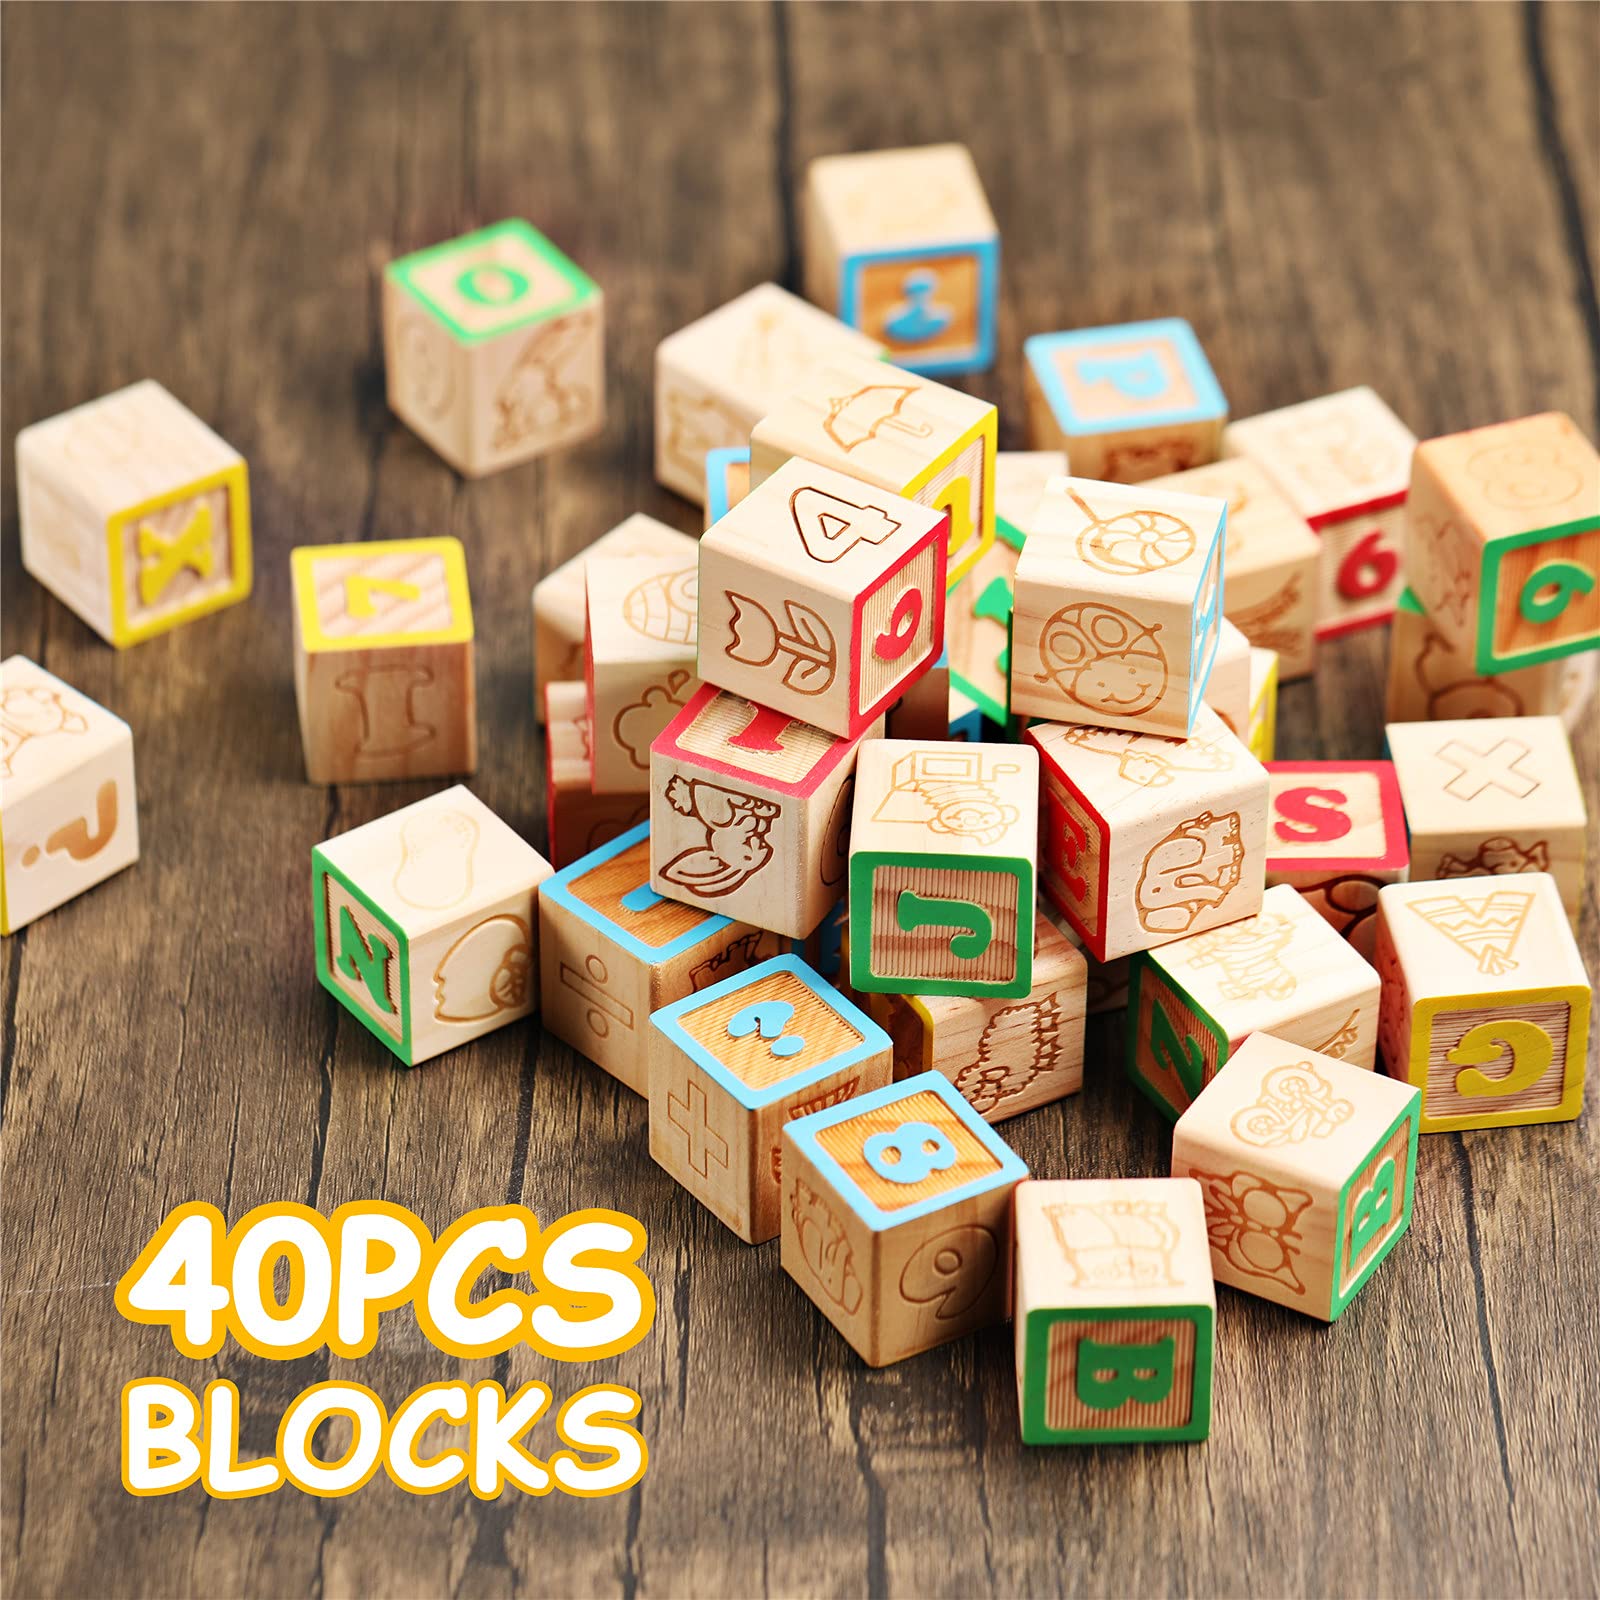 SainSmart Jr. Wooden ABC Alphabet Blocks Set, 40PCS Classic Wood Toy for Stacking Building Educational Learning, with Mesh Bag for Preschool Letters Number Counting for Ages 3 4 5 6 Toddlers,1.2